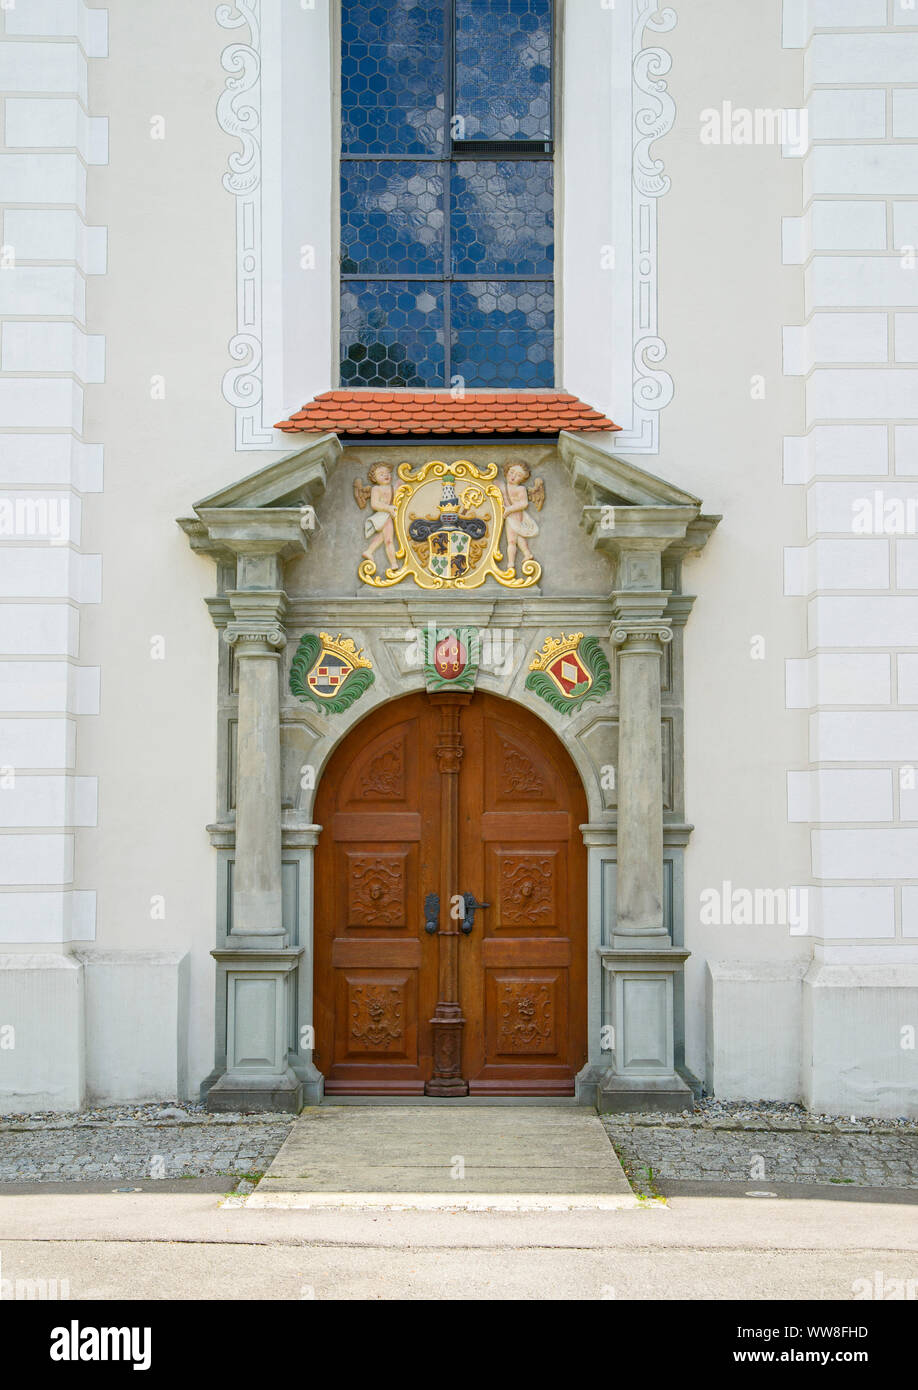 Germany, Baden-WÃ¼rttemberg, Wald, monastery Wald, former Cistercian nunnery, portal from 1698 with the coat of arms of the abbess Maria Jakobe von Bodman (above), and of the founder Burkhard von Weckenstein (right) left of the Cistercian beams Stock Photo